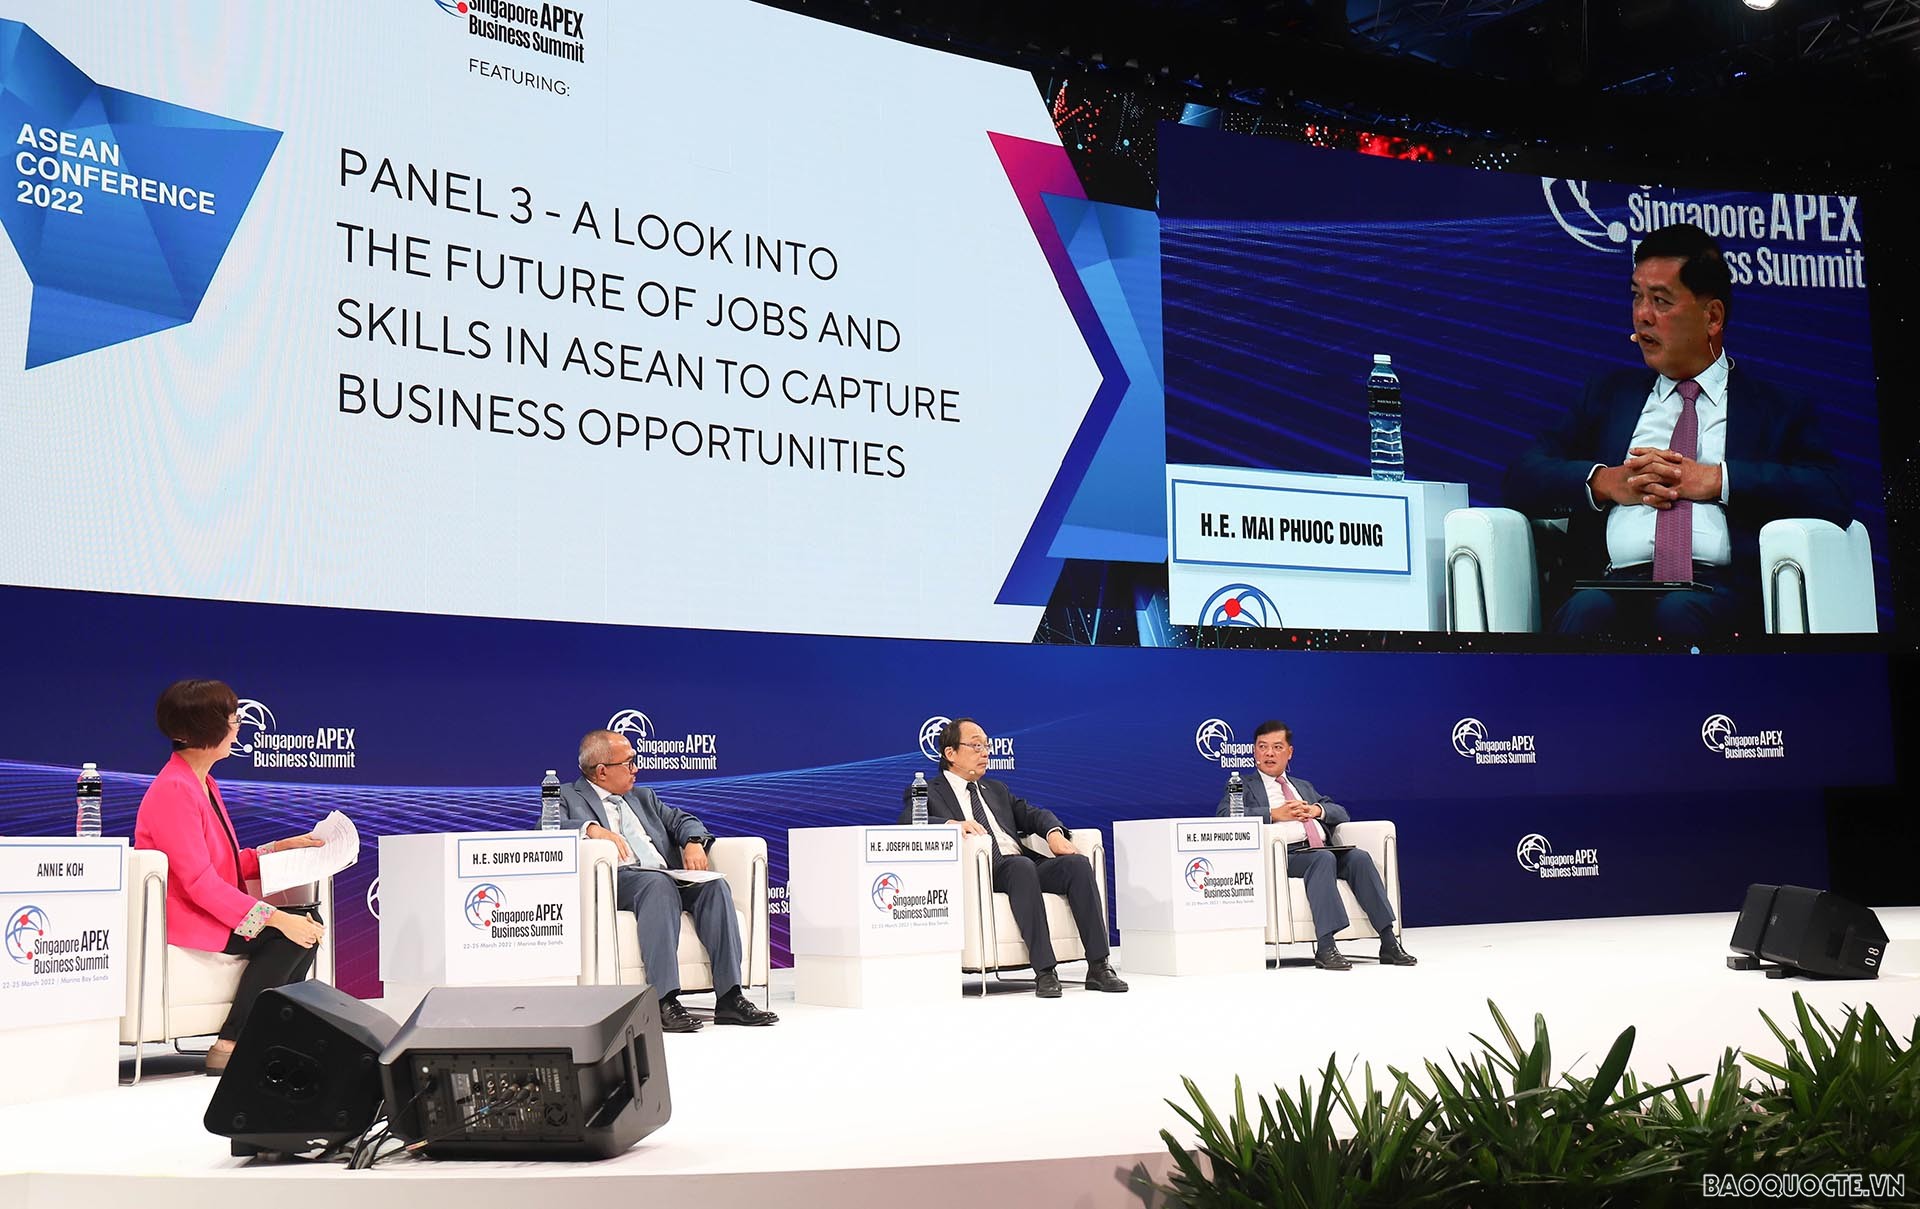 Ambassador Mai Phuoc Dung attended and spoke at the Singapore APEX 2022 Business Conference